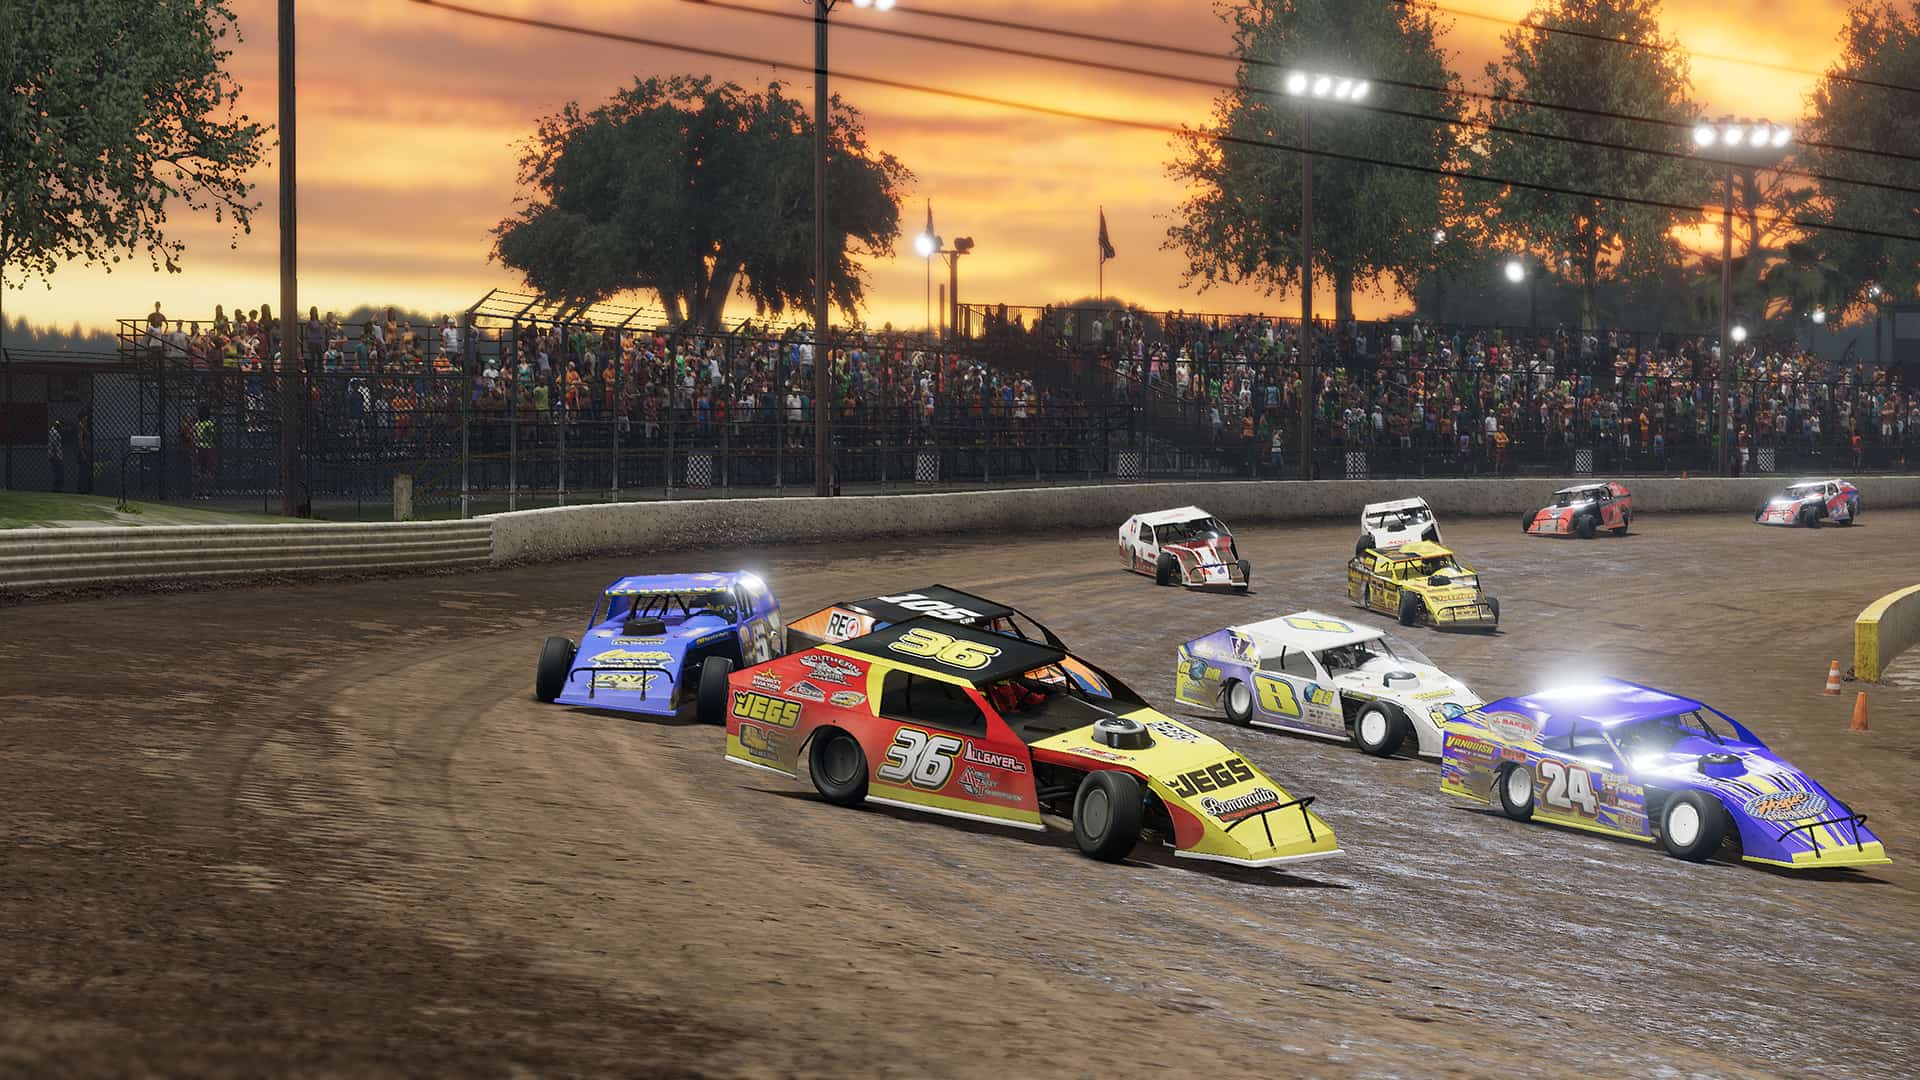 Hands on with the World of Outlaws: Dirt Racing UMP Modified